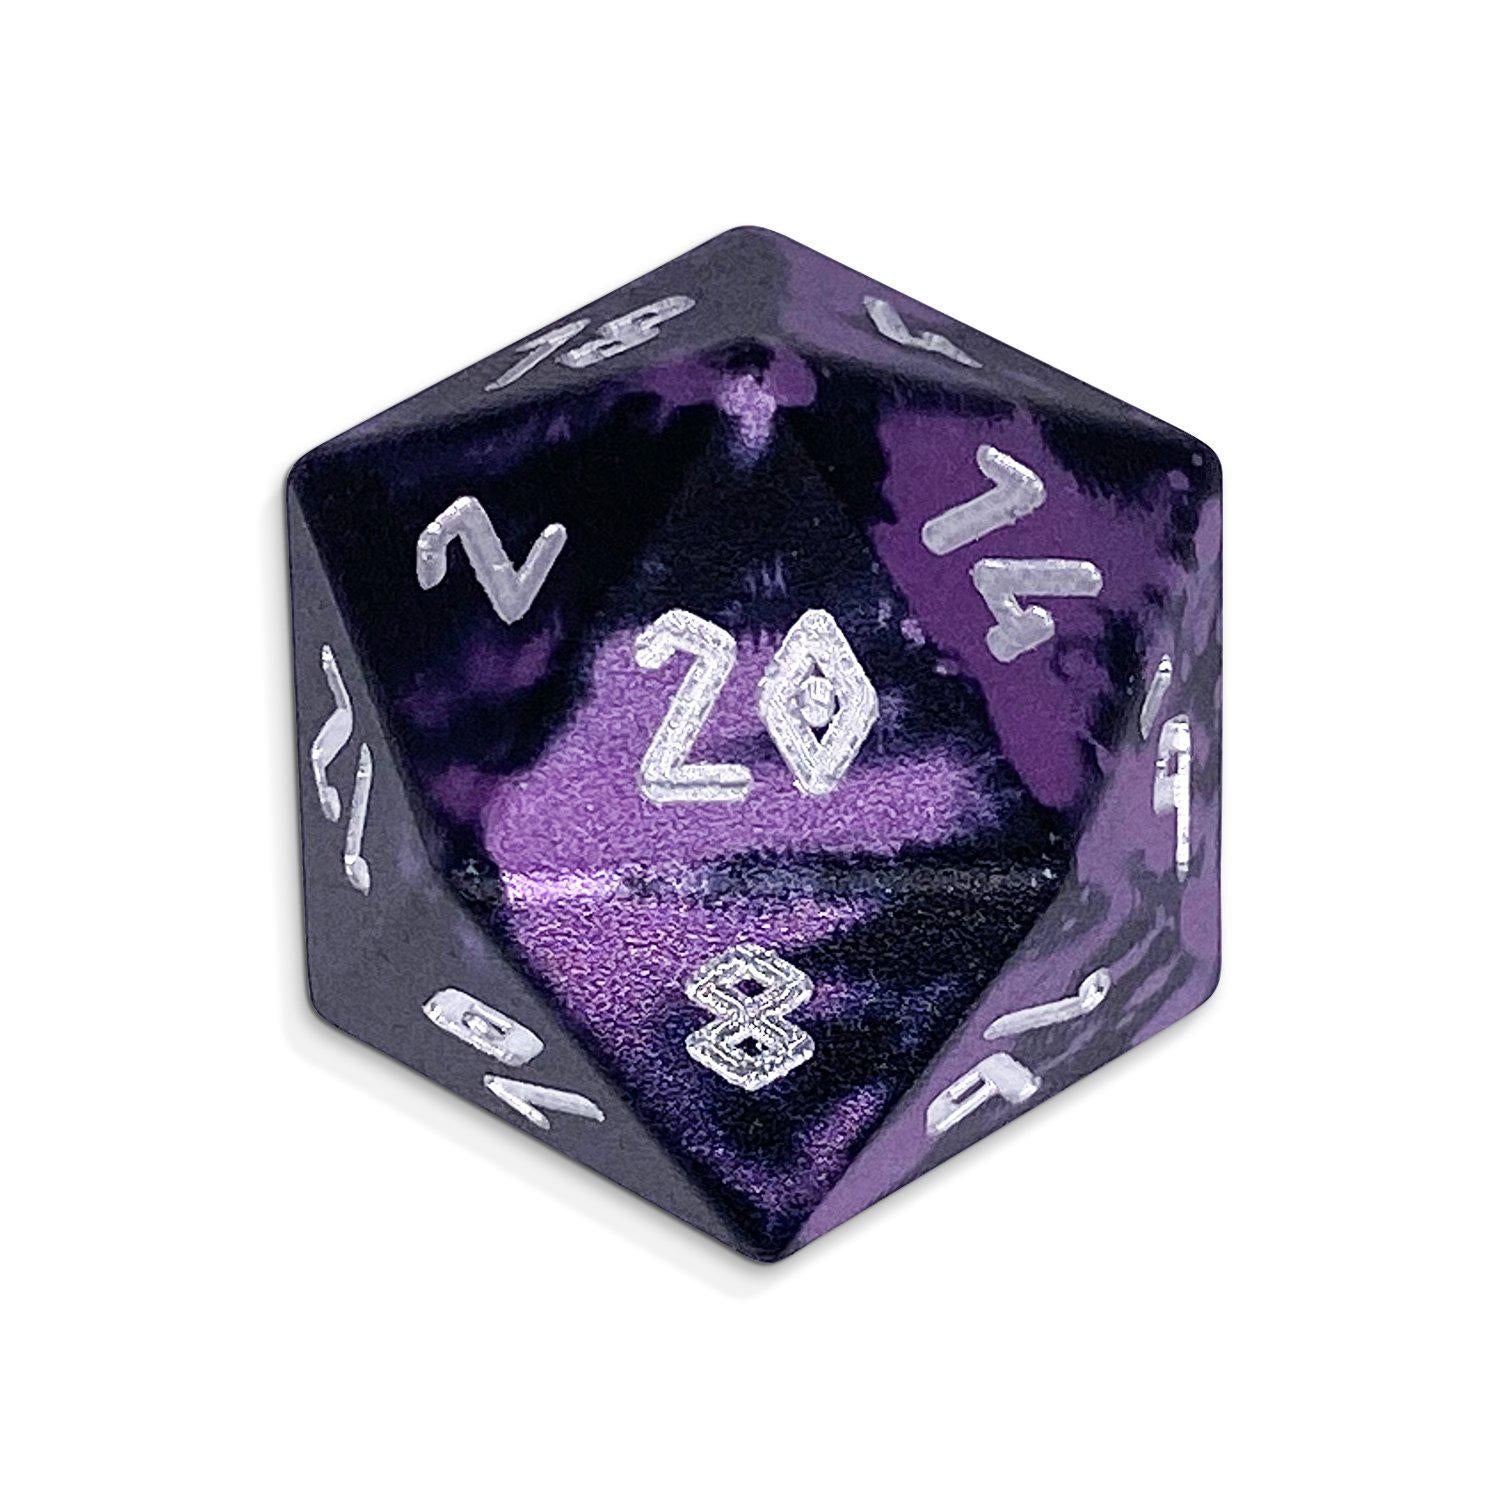 Single Wondrous Dice® D20 in Dracolich by Norse Foundry 6063 Aircraft Grade Aluminum